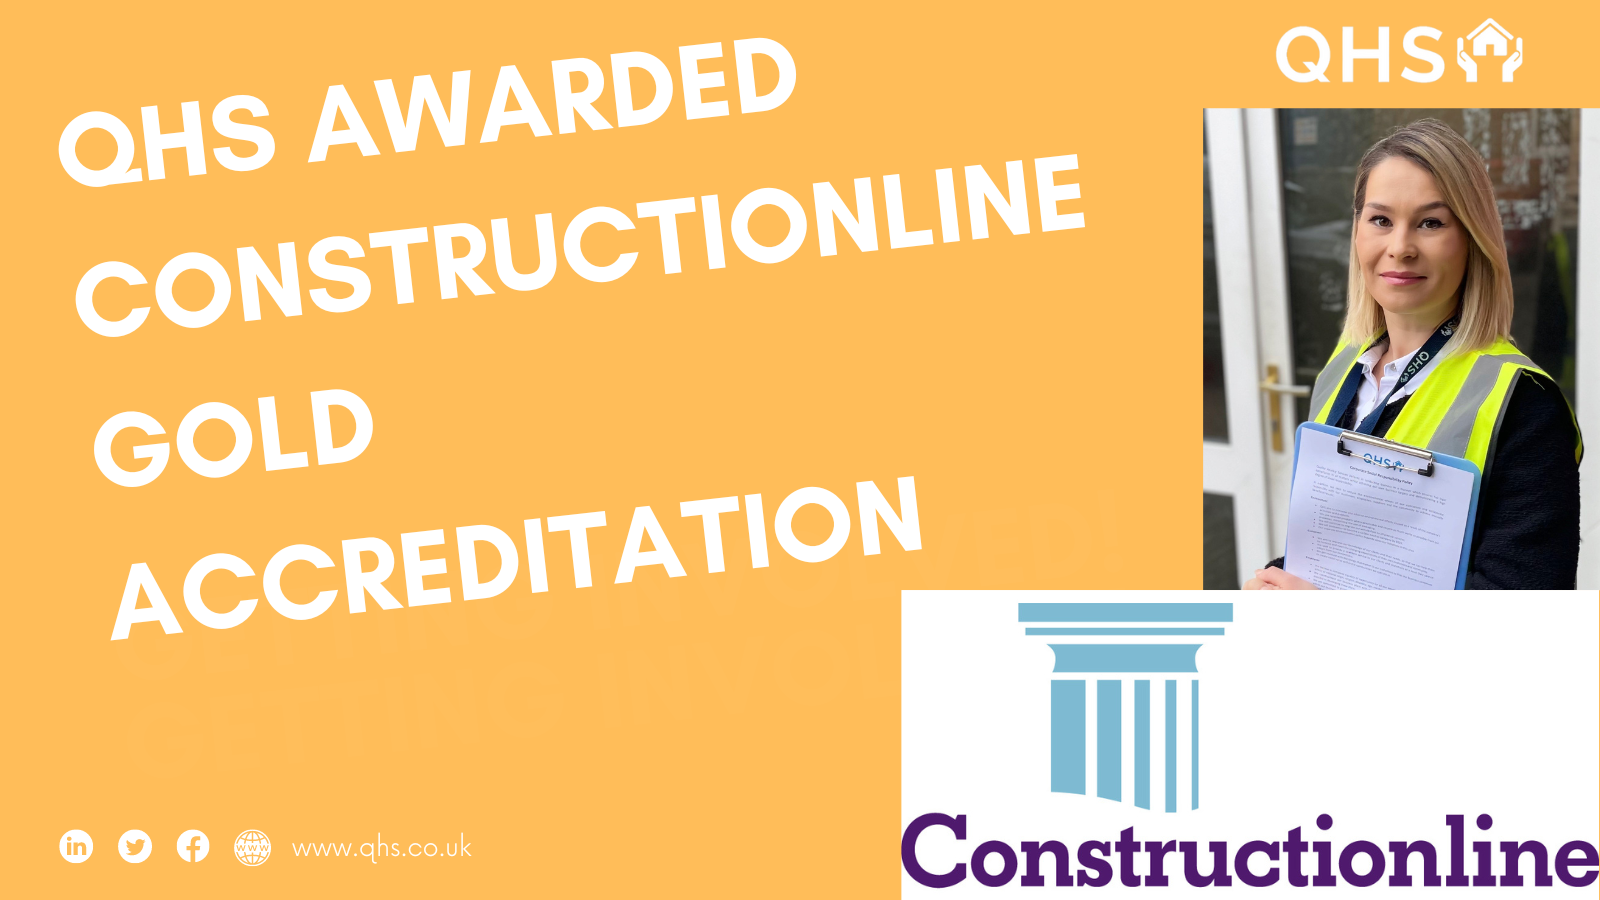 QHS Awarded Constructionline Gold Accreditation